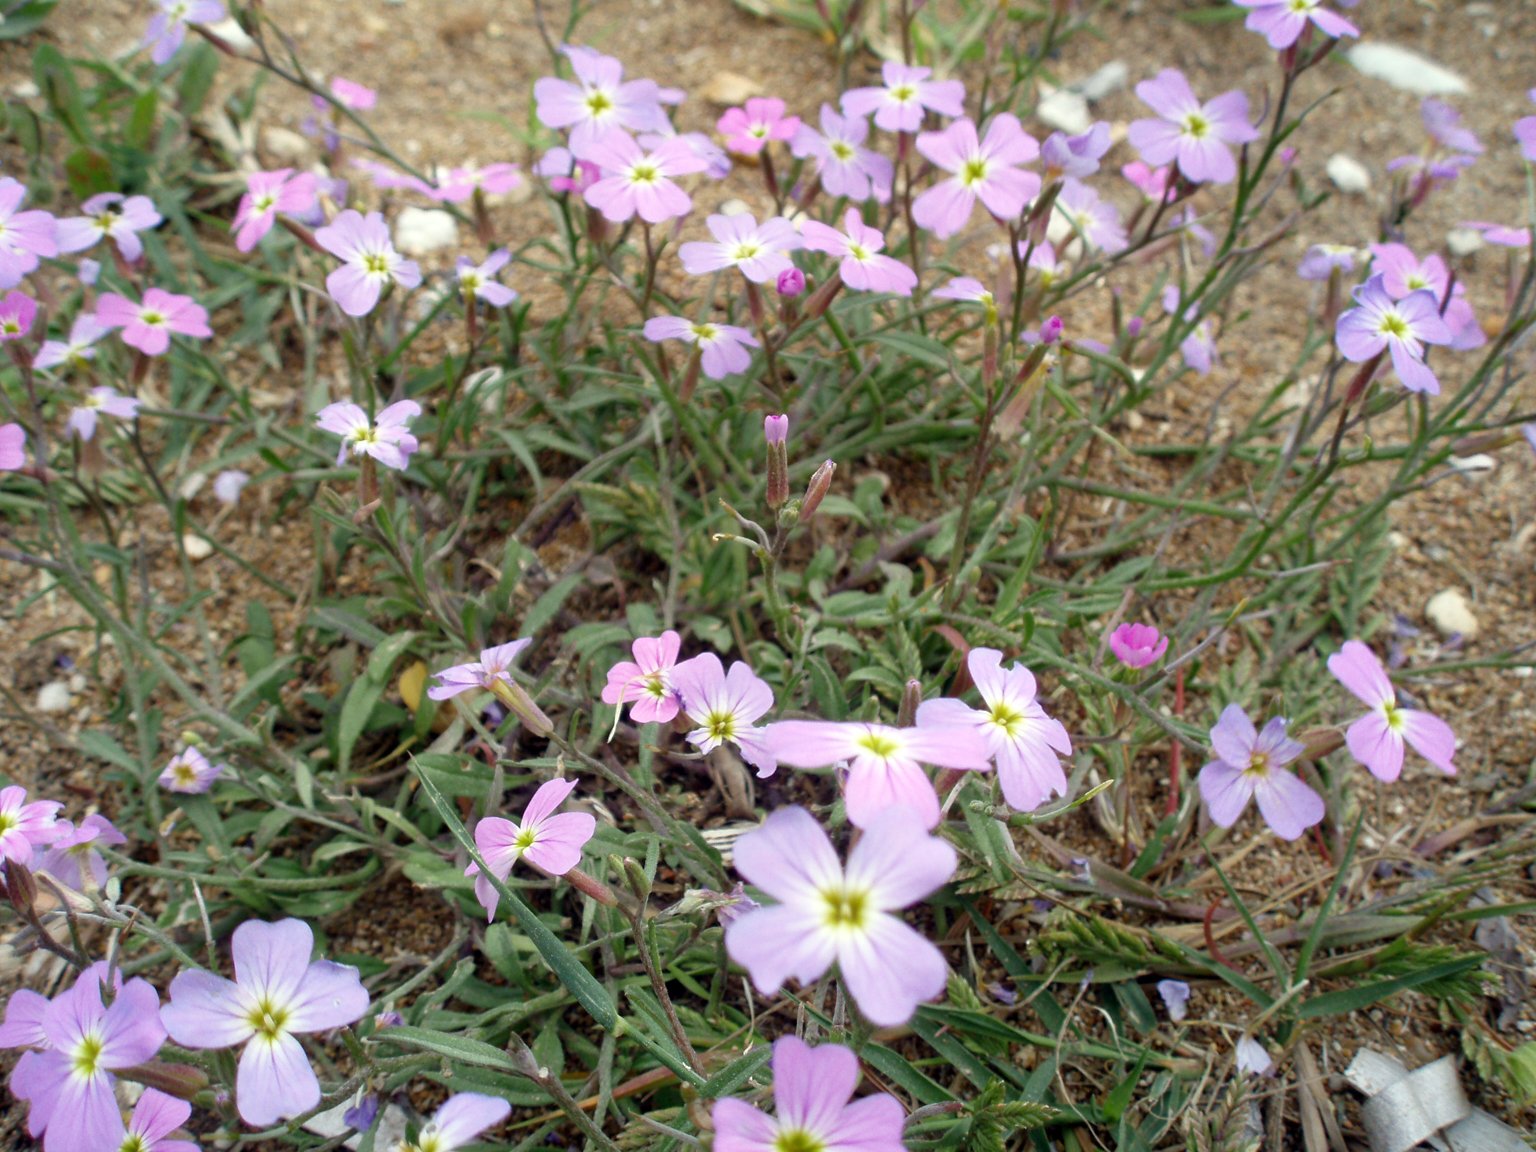 small purple flowers are growing near the sand